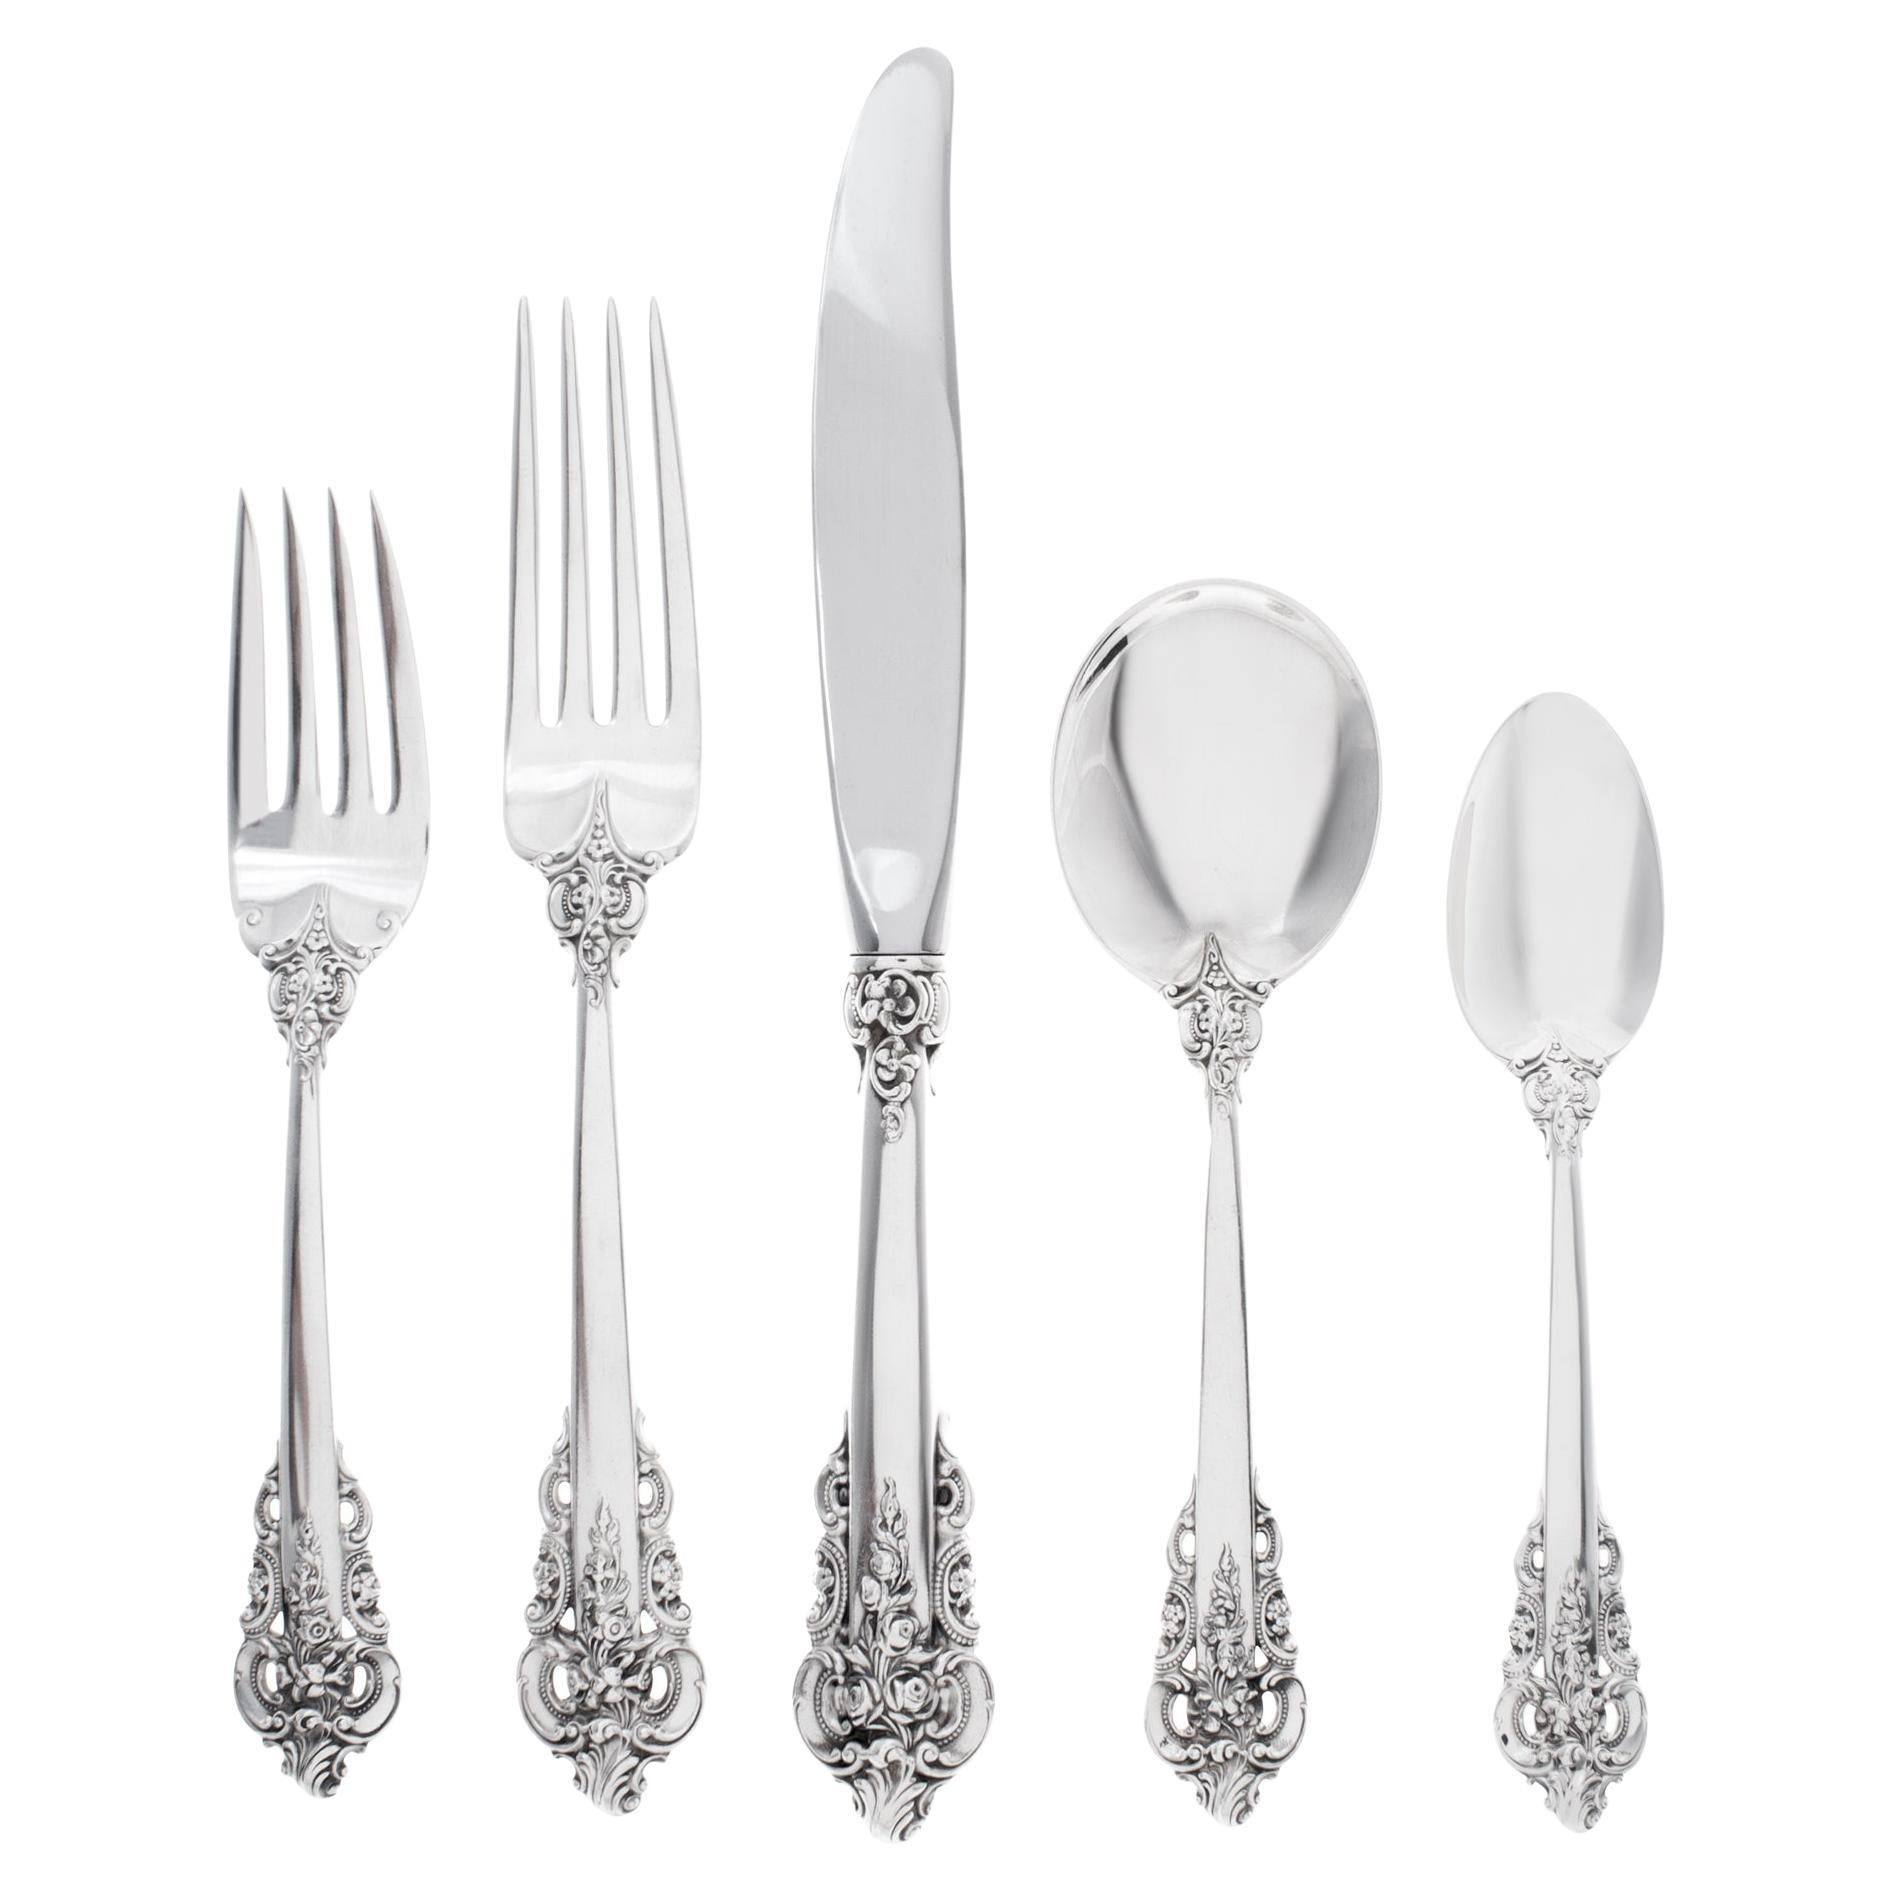 "Grande Baroque" Sterling Silver Flatware Patented in 1941 by Wallace For Sale